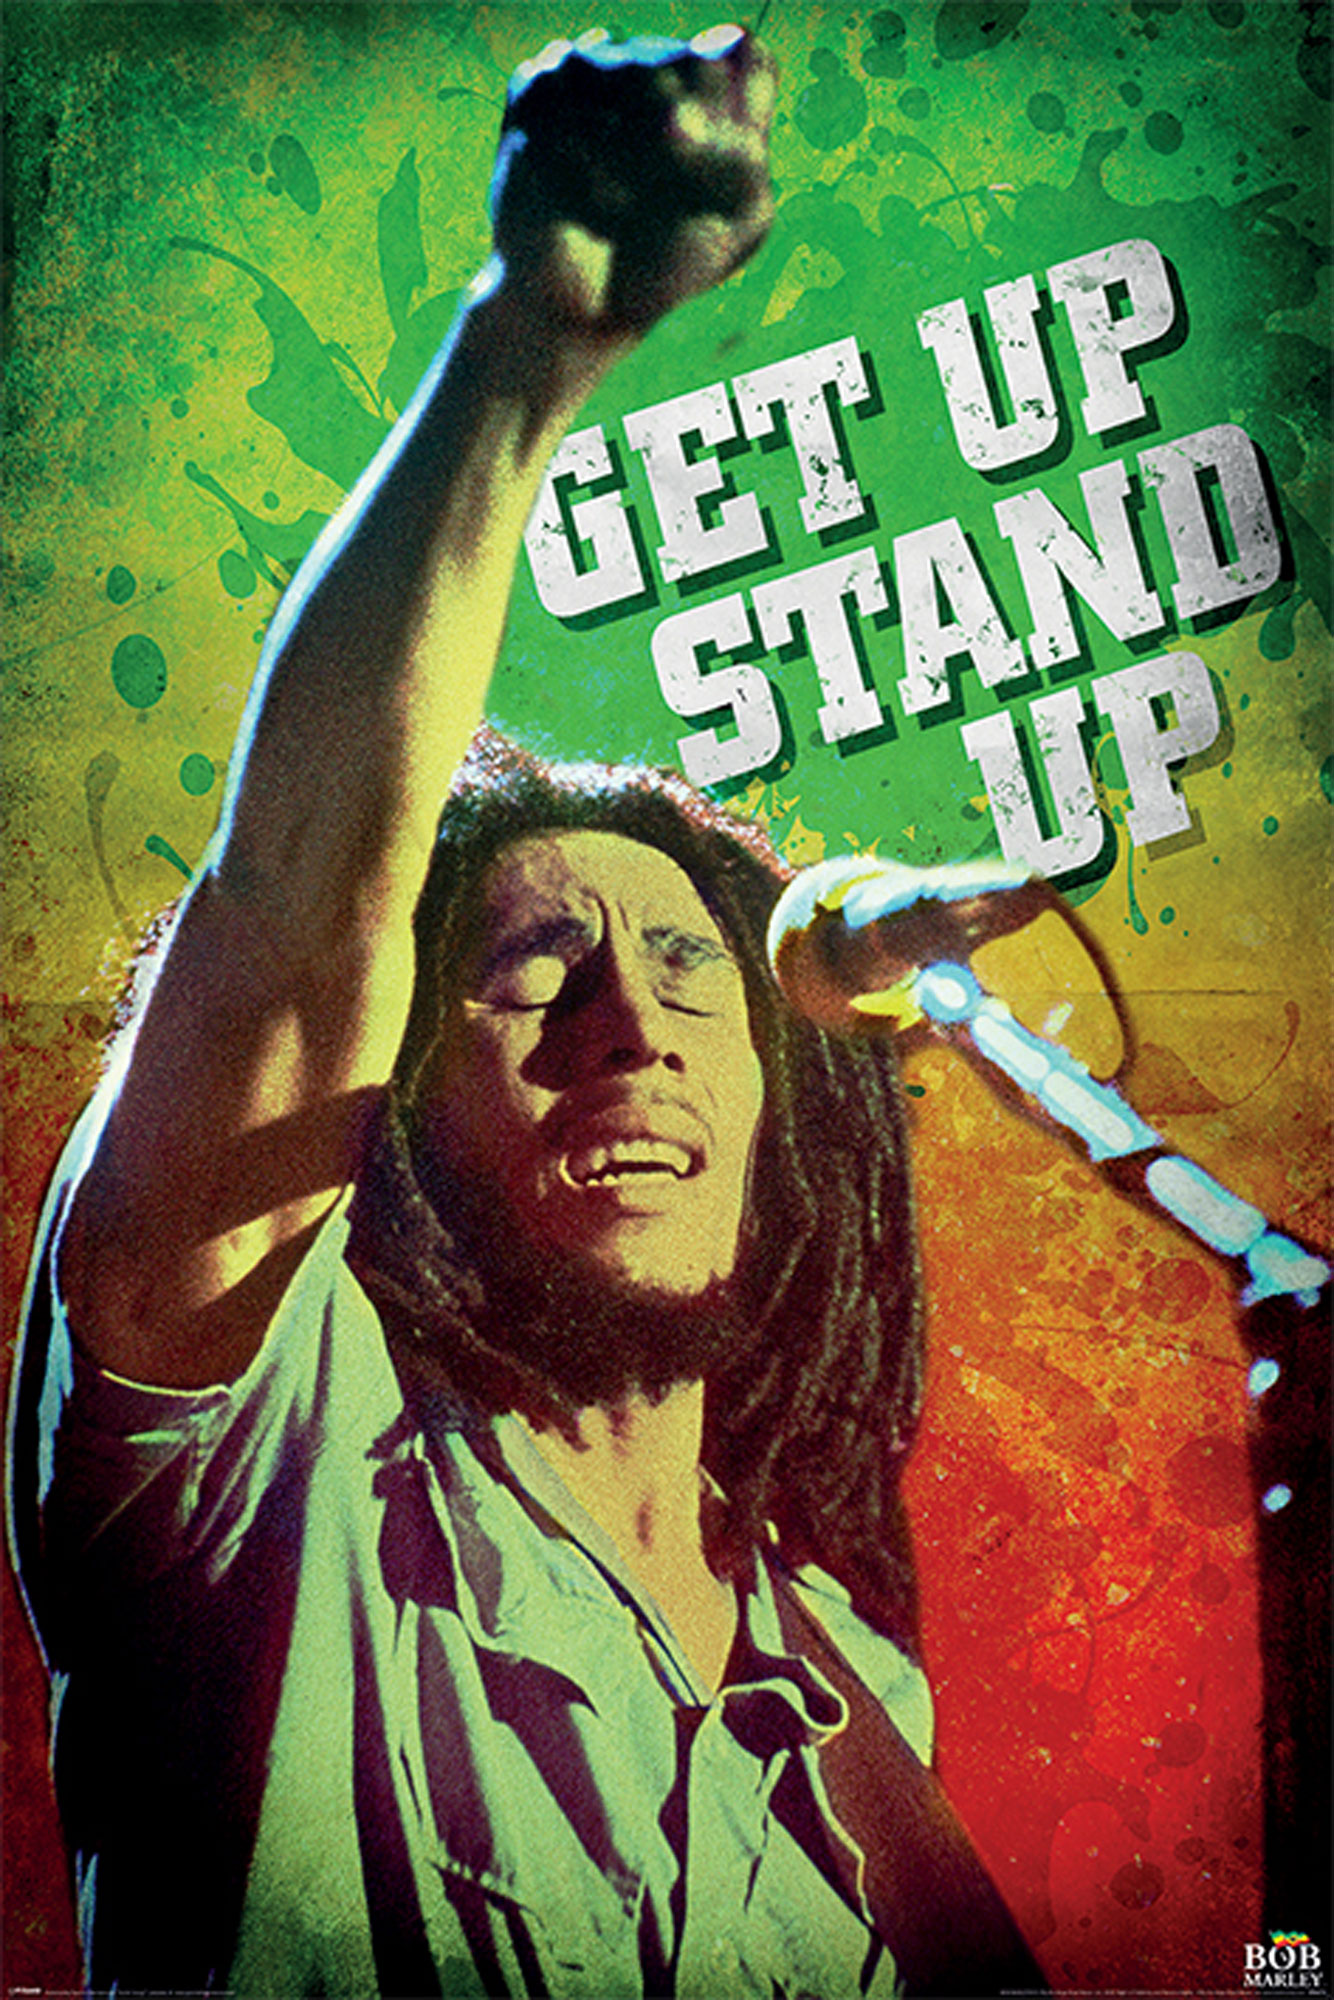 Marley, Bob - Get Stand Up Up